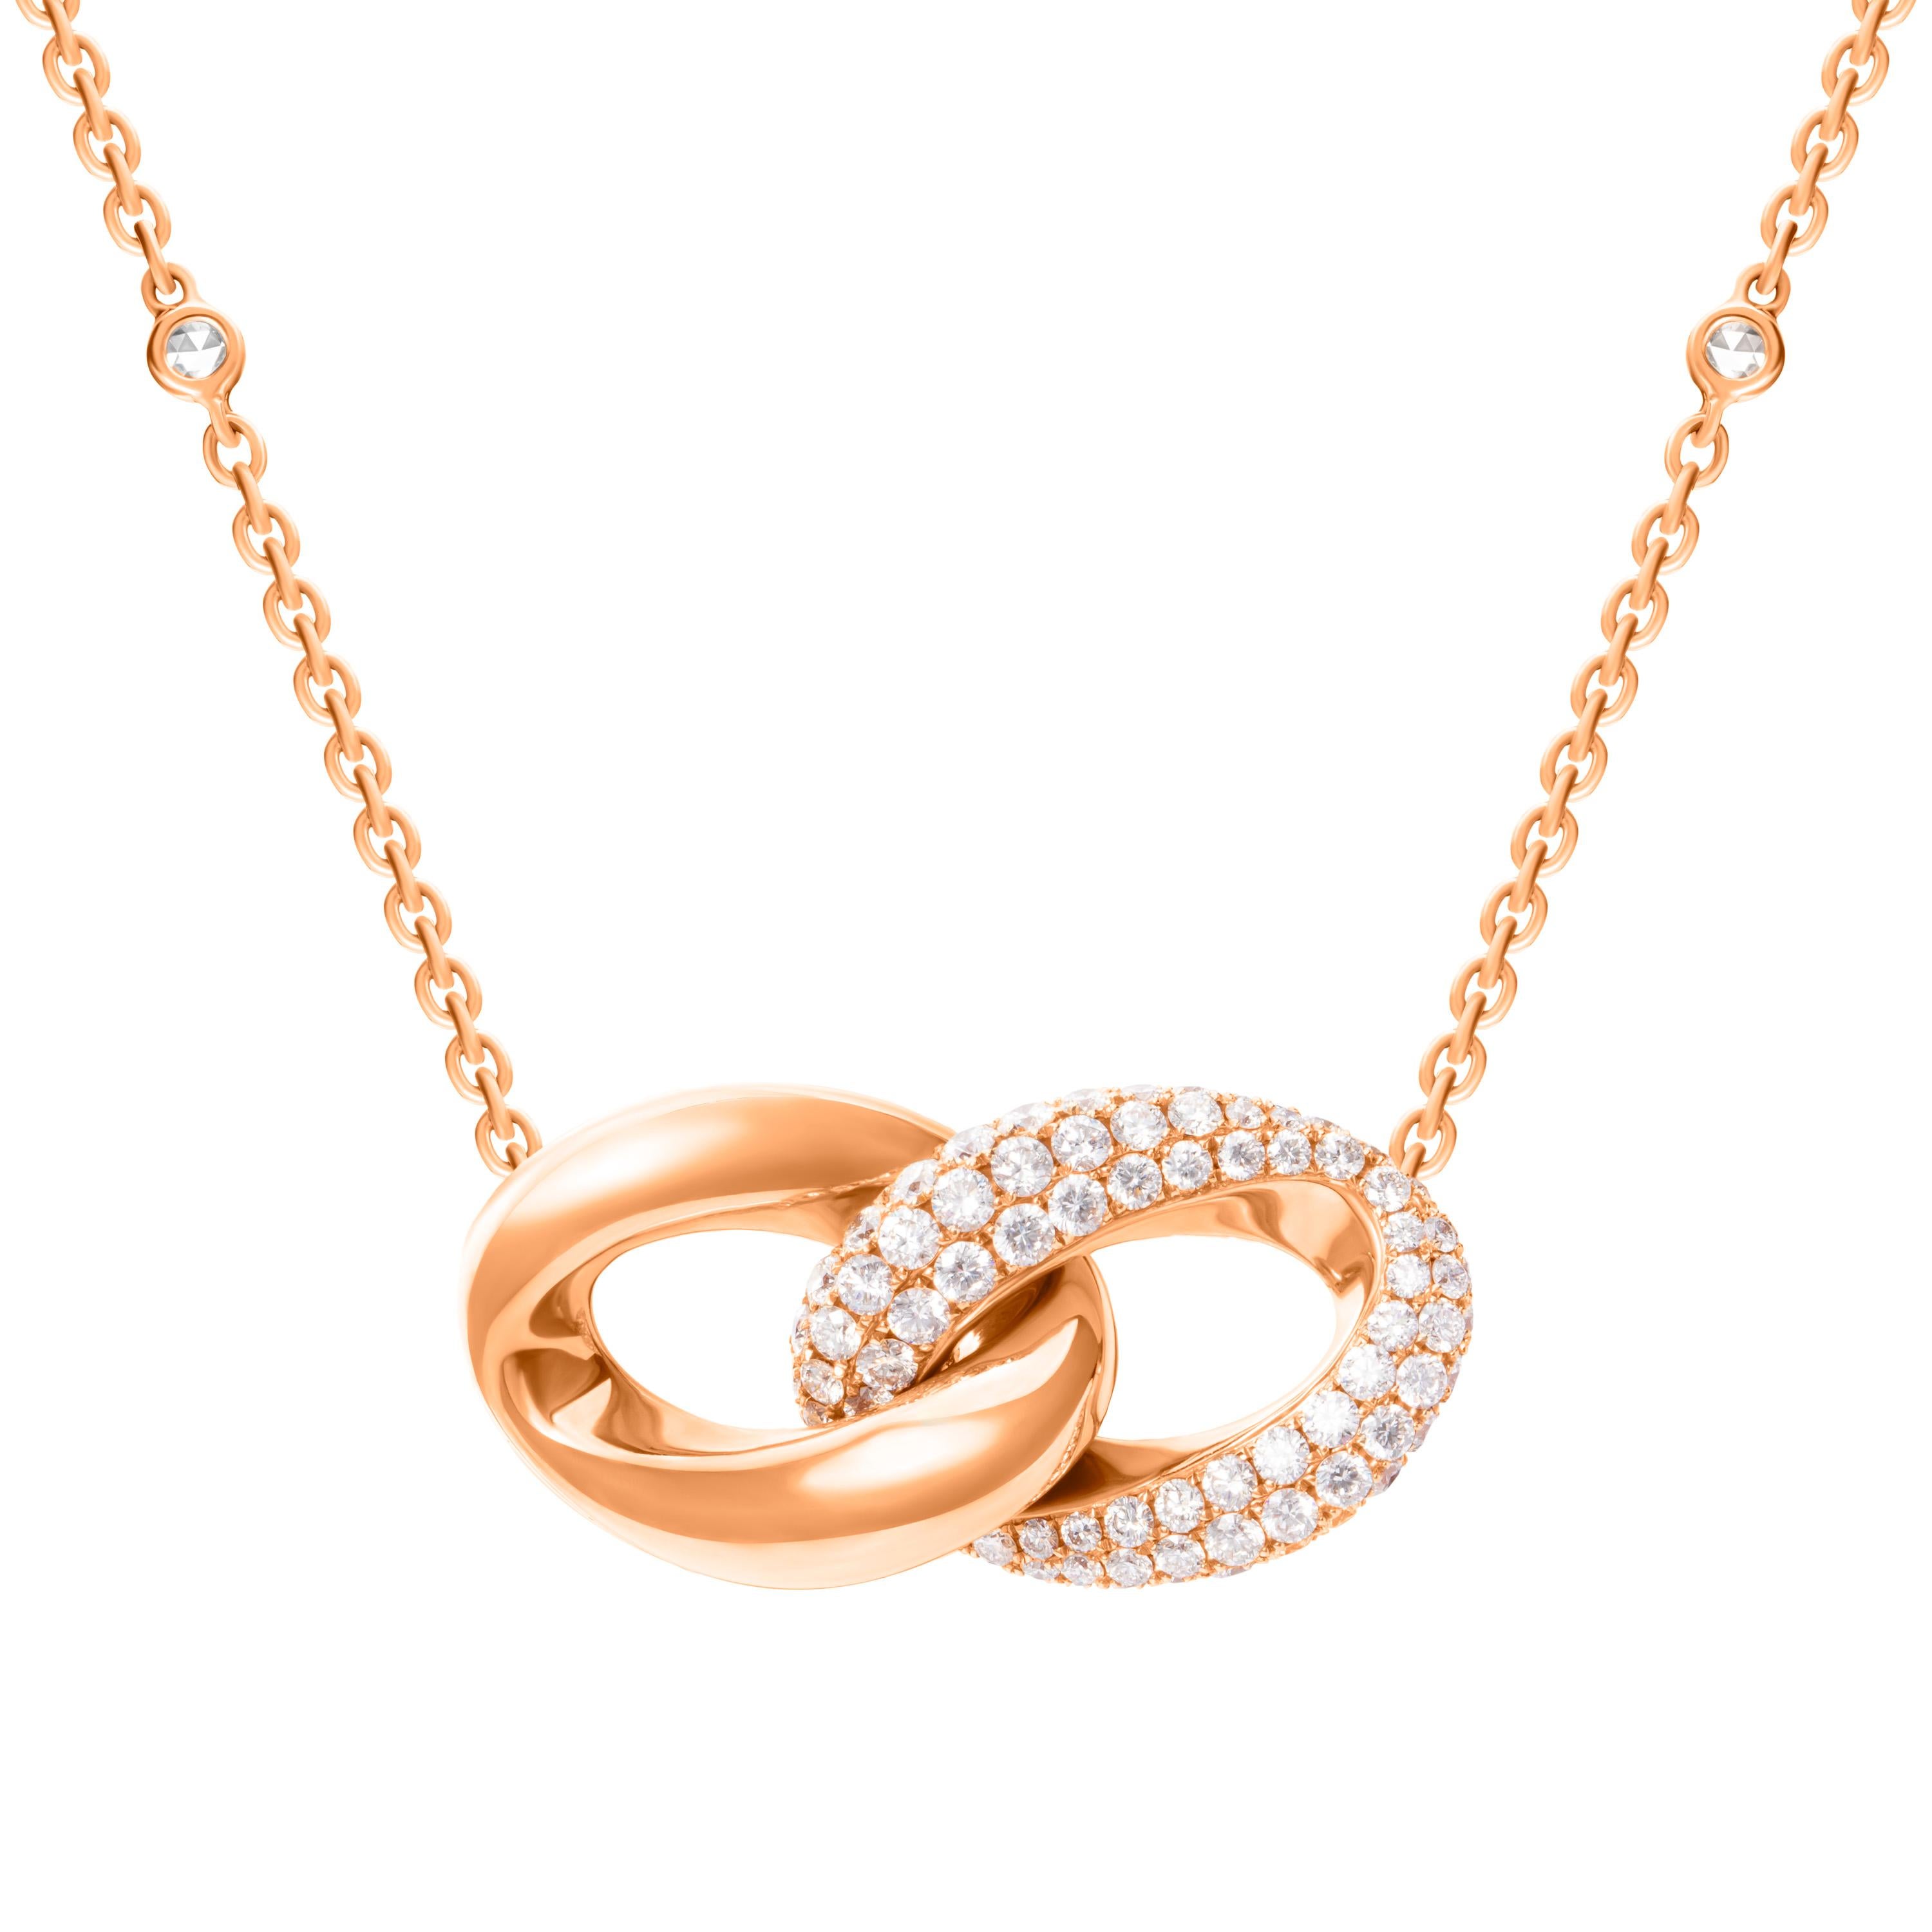 Defined by sleek curves and contours, this delicate necklace features a duo of interlocking loops in 18-karat rose gold and 1.55 carats of pavé-set diamonds.  The cable chain features 0.36 carats of rose cut round diamonds.  Chain length 18 inches. 